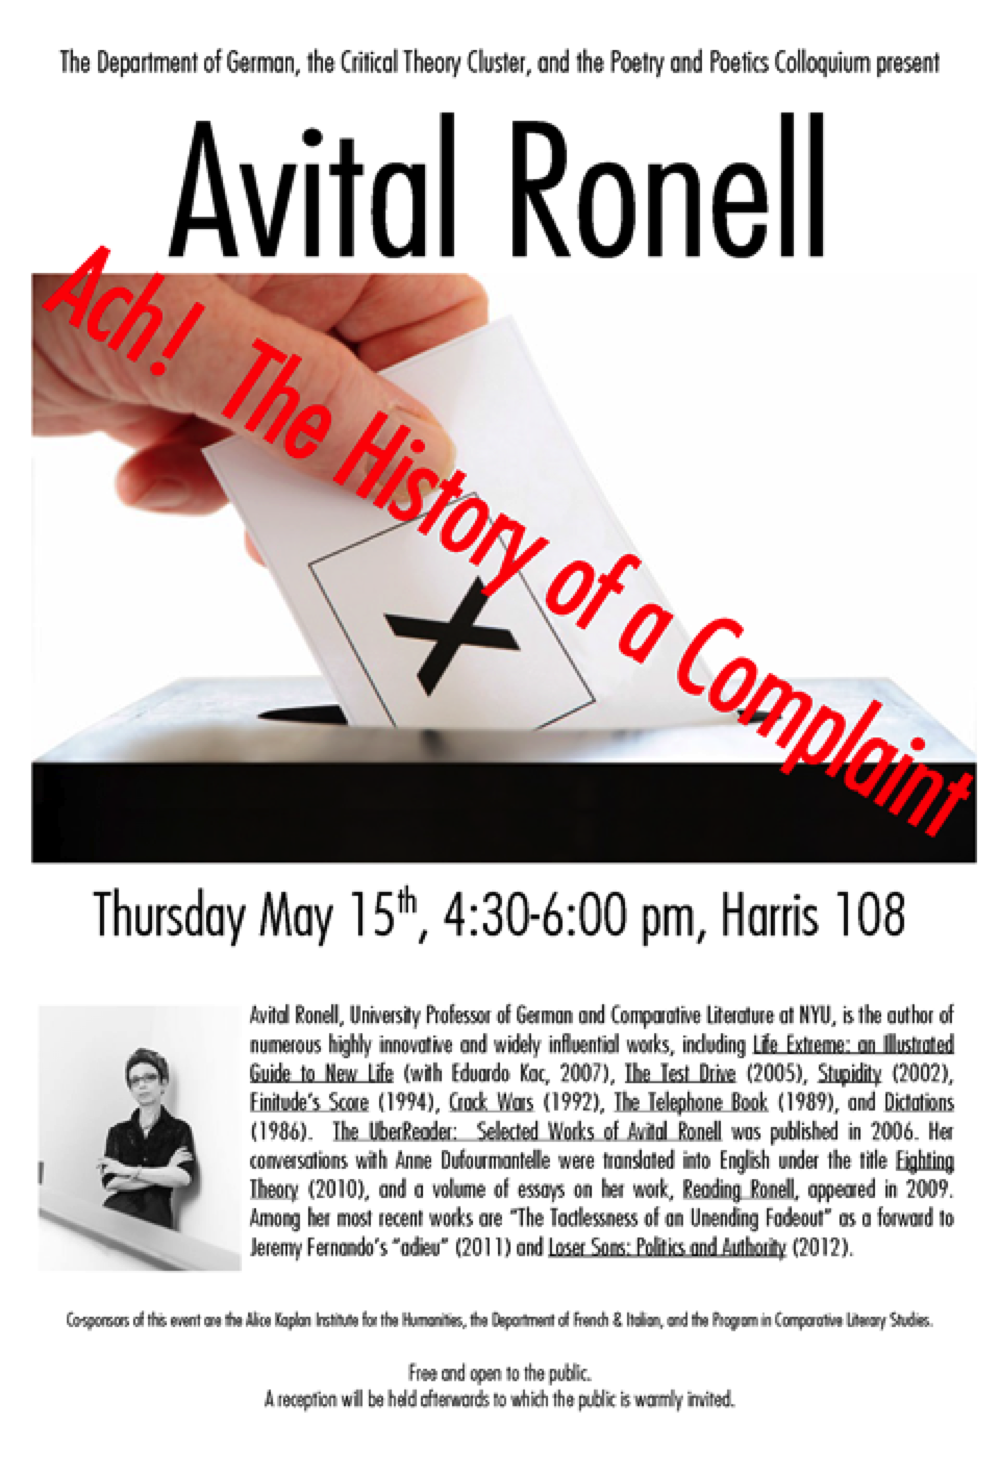 Avital Ronell: Ach! The History of a Complaint